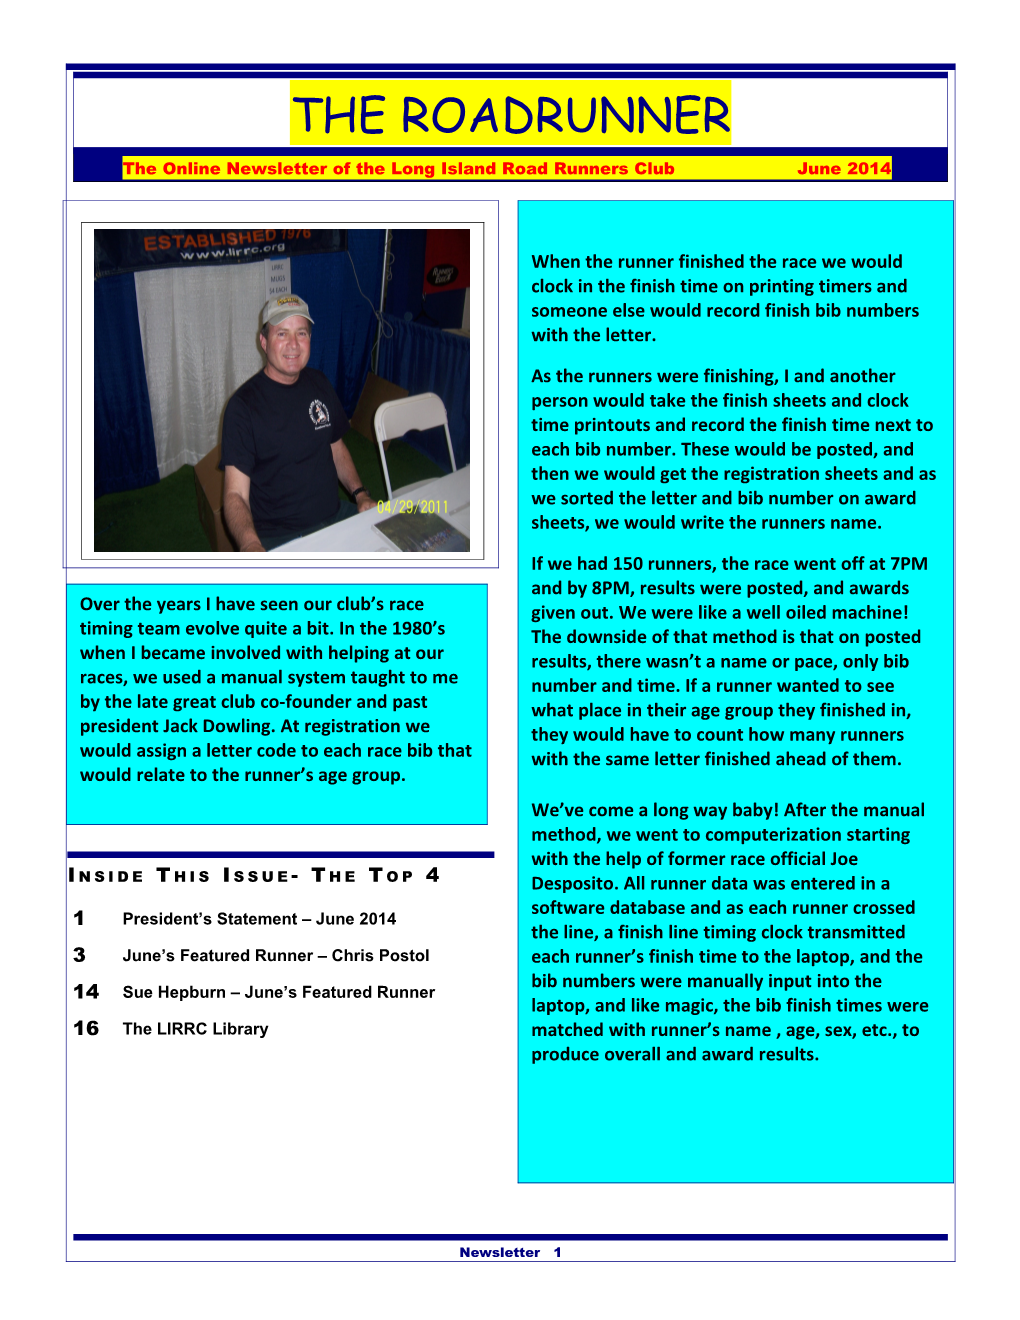 The Online Newsletter of the Long Island Road Runners Club June 2014